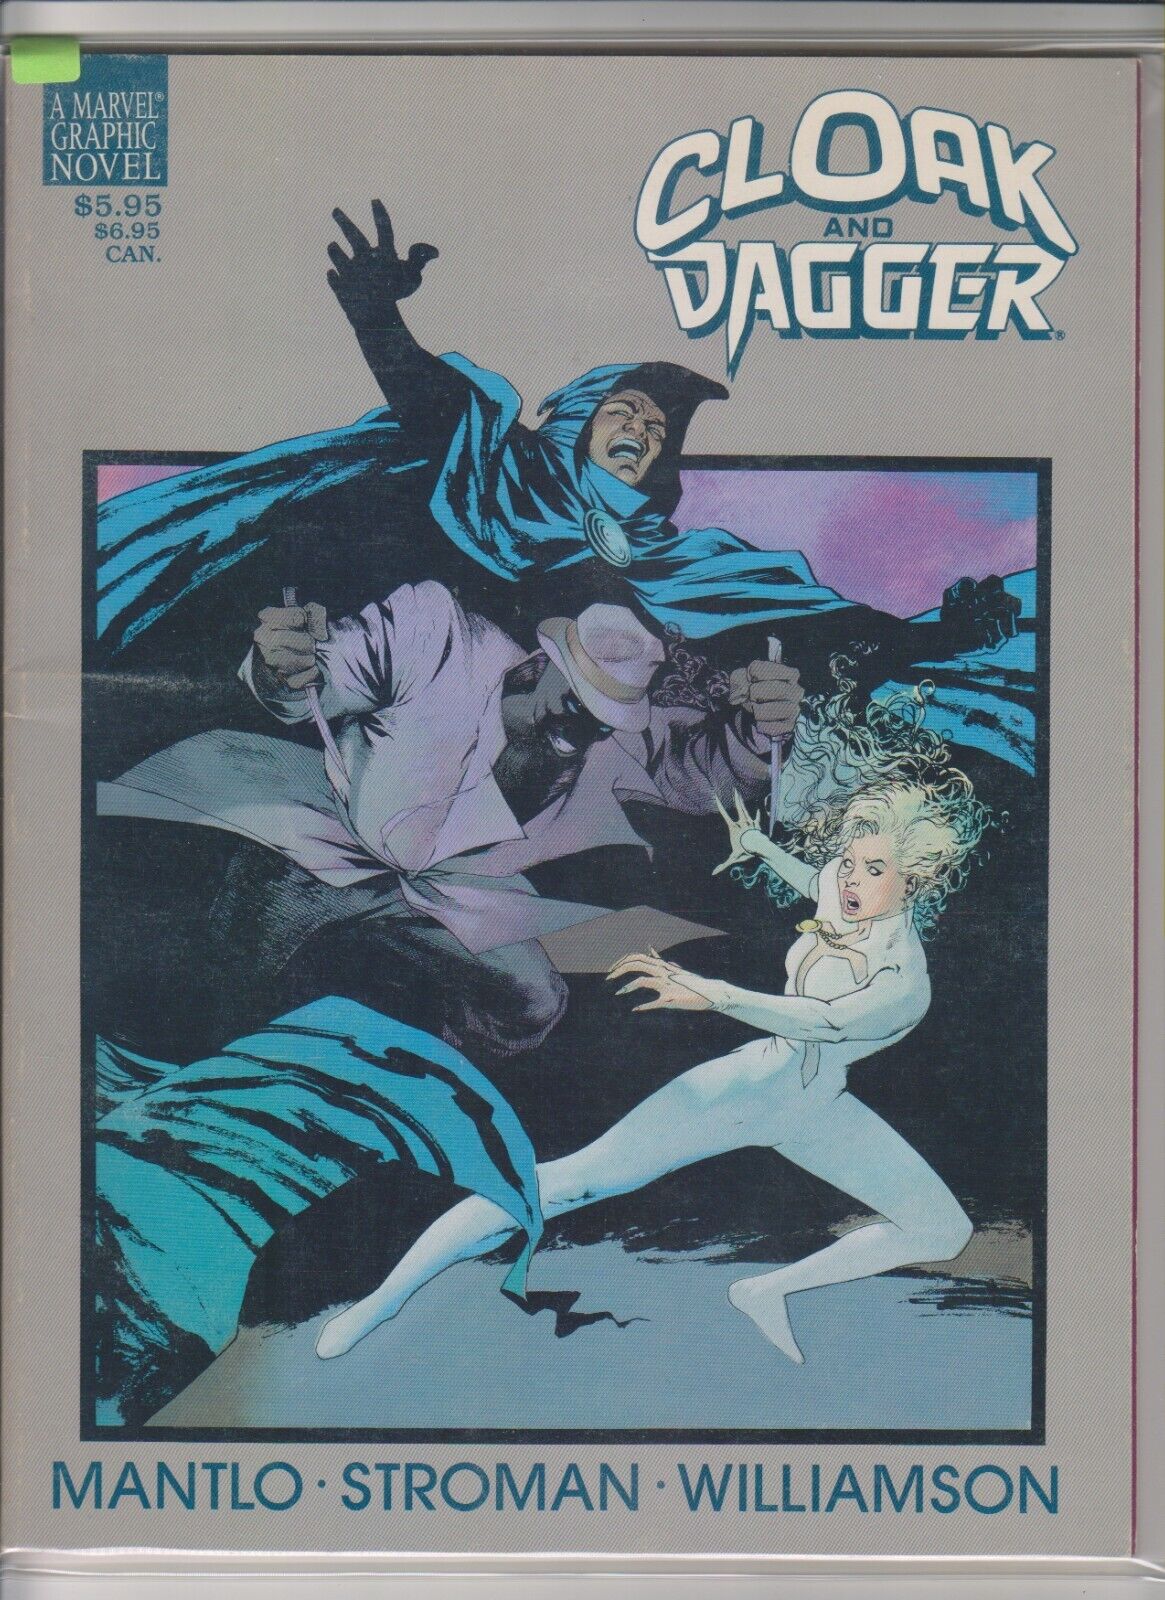 Lot of 2 Cloak and Dagger Marvel Graphic Novel #34 Predator and # 56 Power Pack